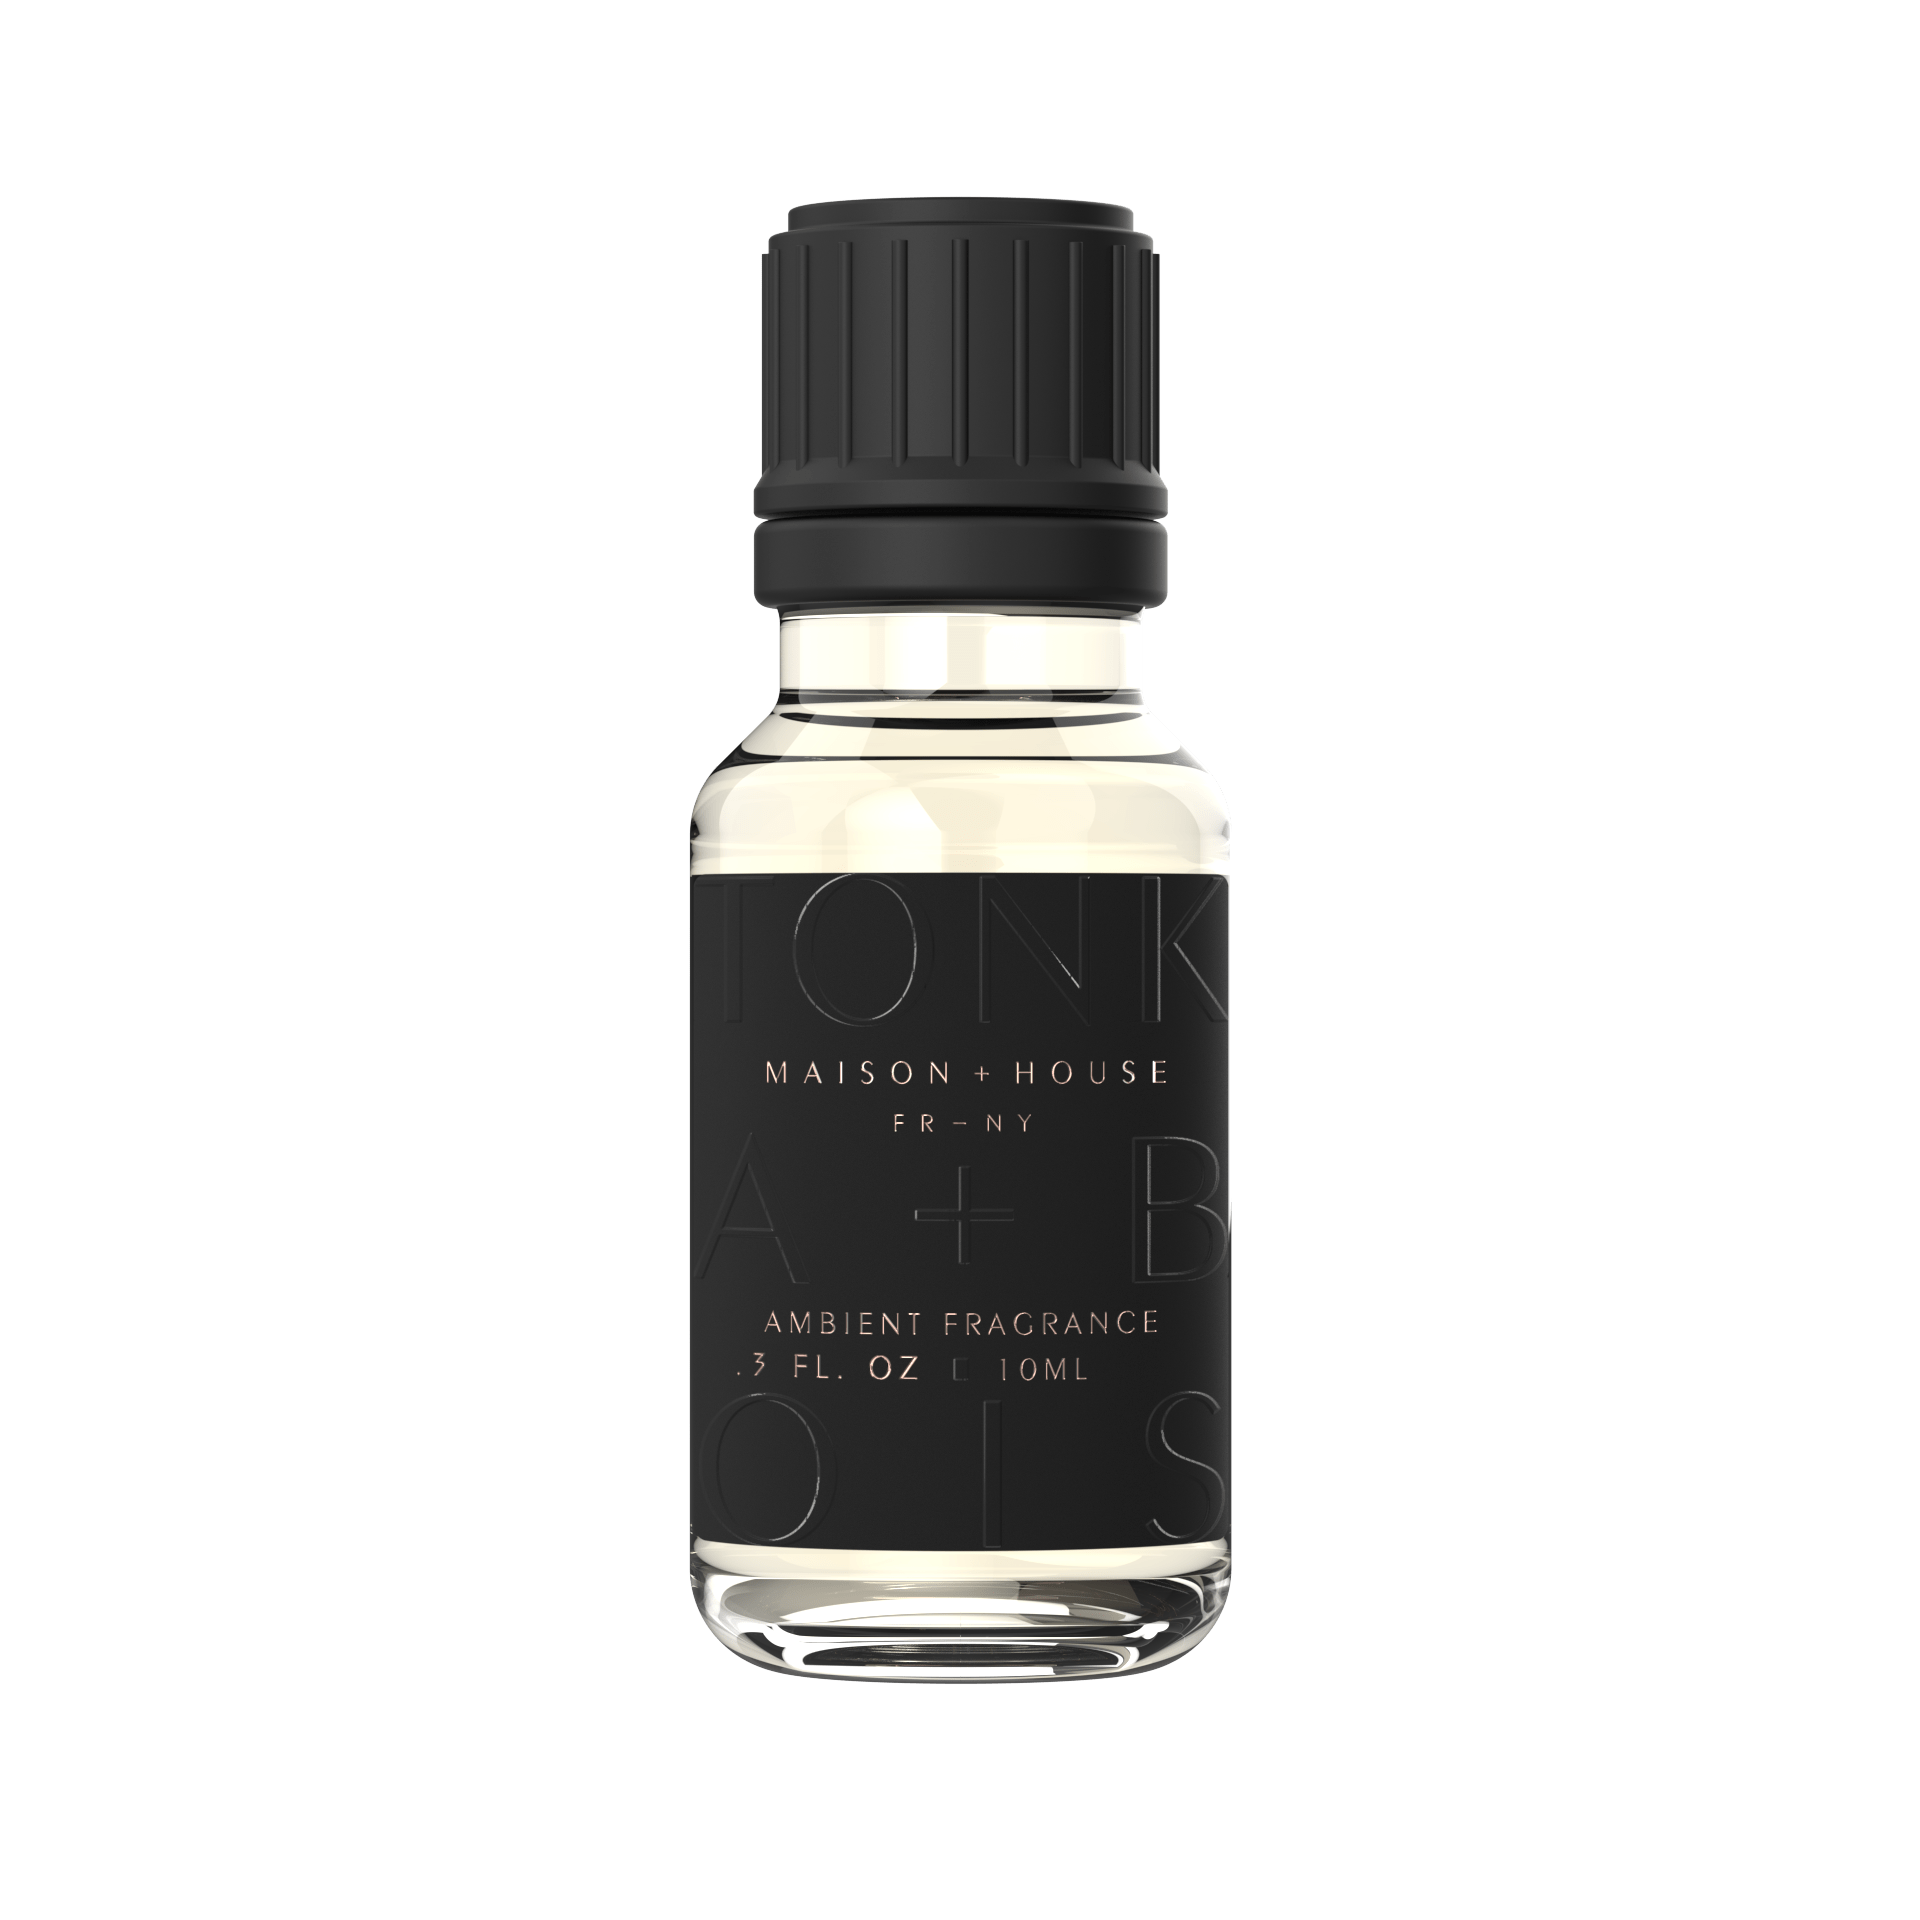 Maison+House Tonka & Woods French Ambient Fragrance